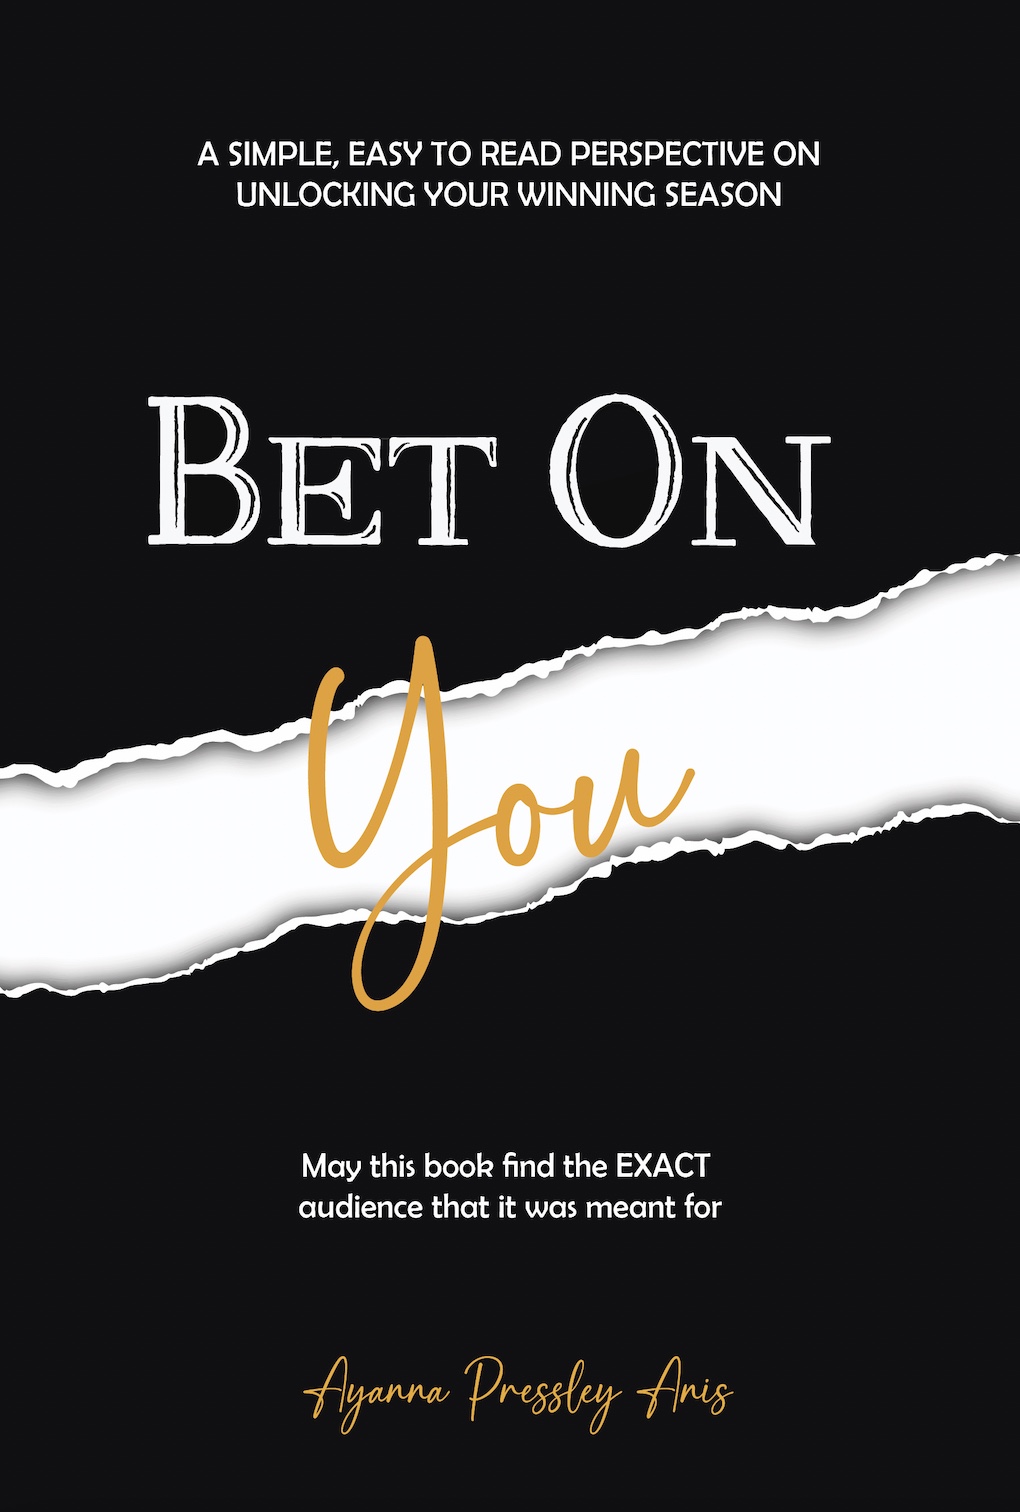 New Book "Bet on You" Encourages Readers to Seize Control of Life by Unlocking Their Inner Power 